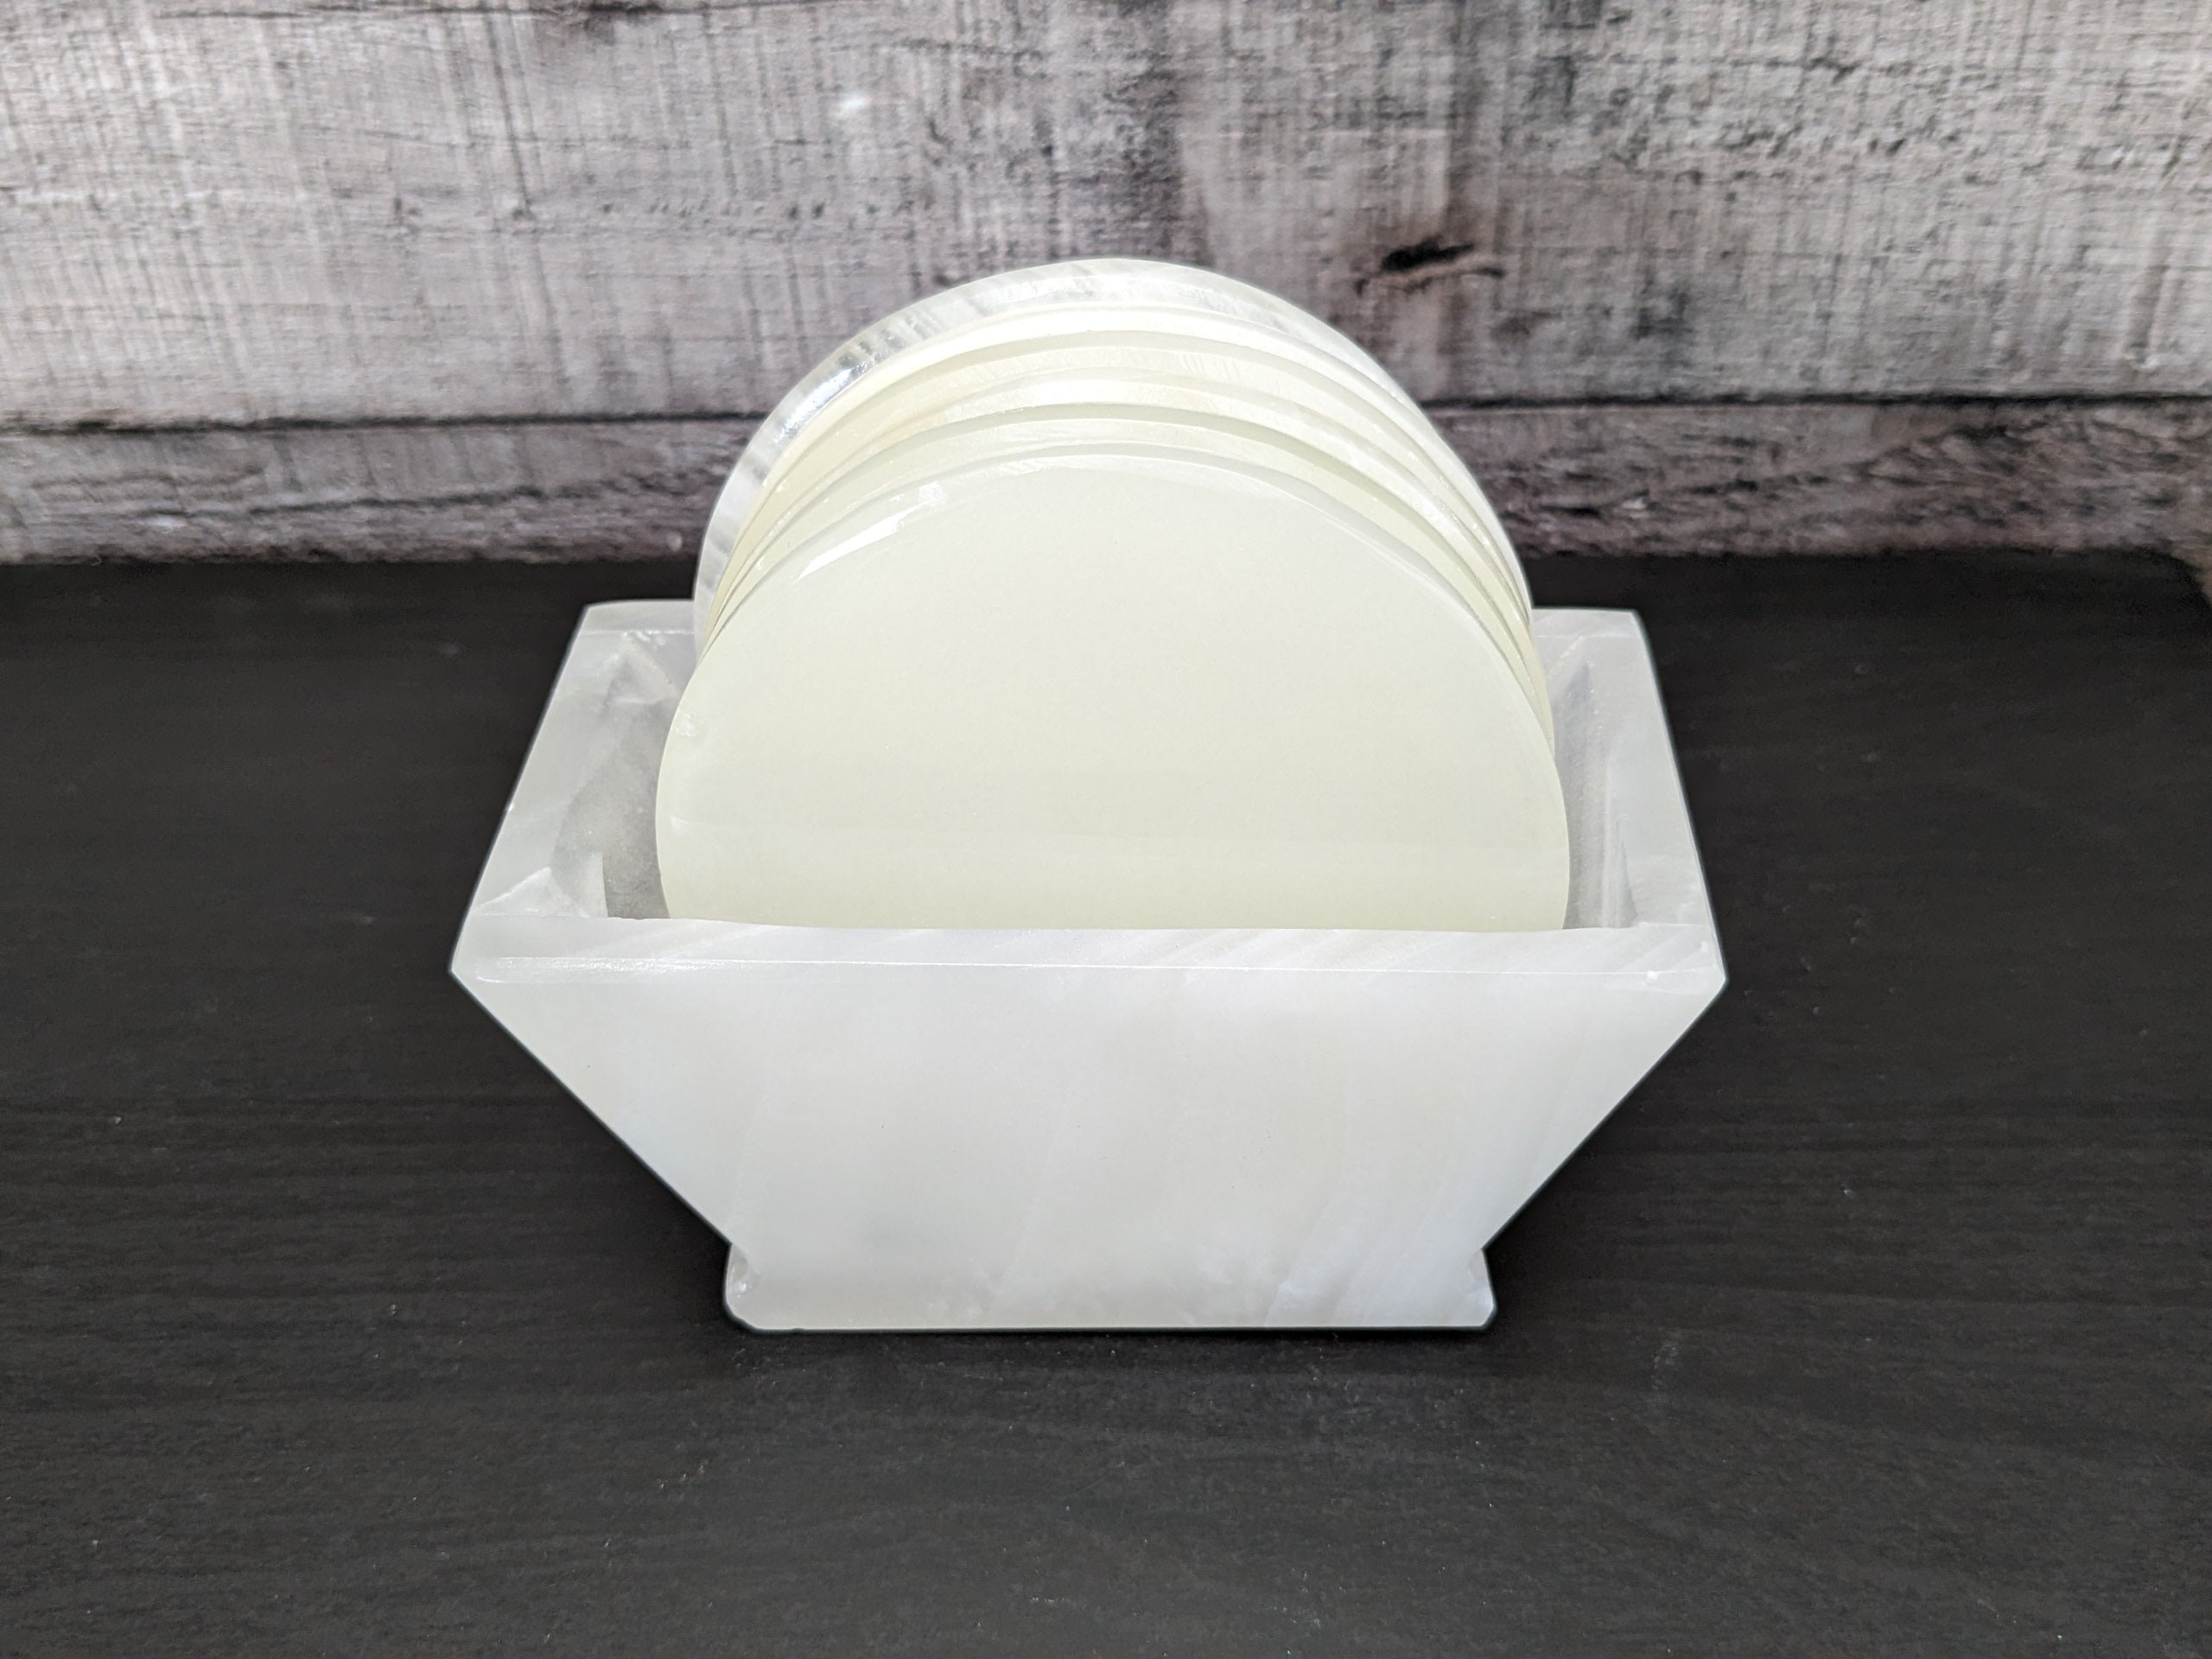 White Onyx Coaster Set of Six with Holder. The coasters are round. Handmade in Mexico. Ships from the USA. Buy now at www.felipeandgrace.com.